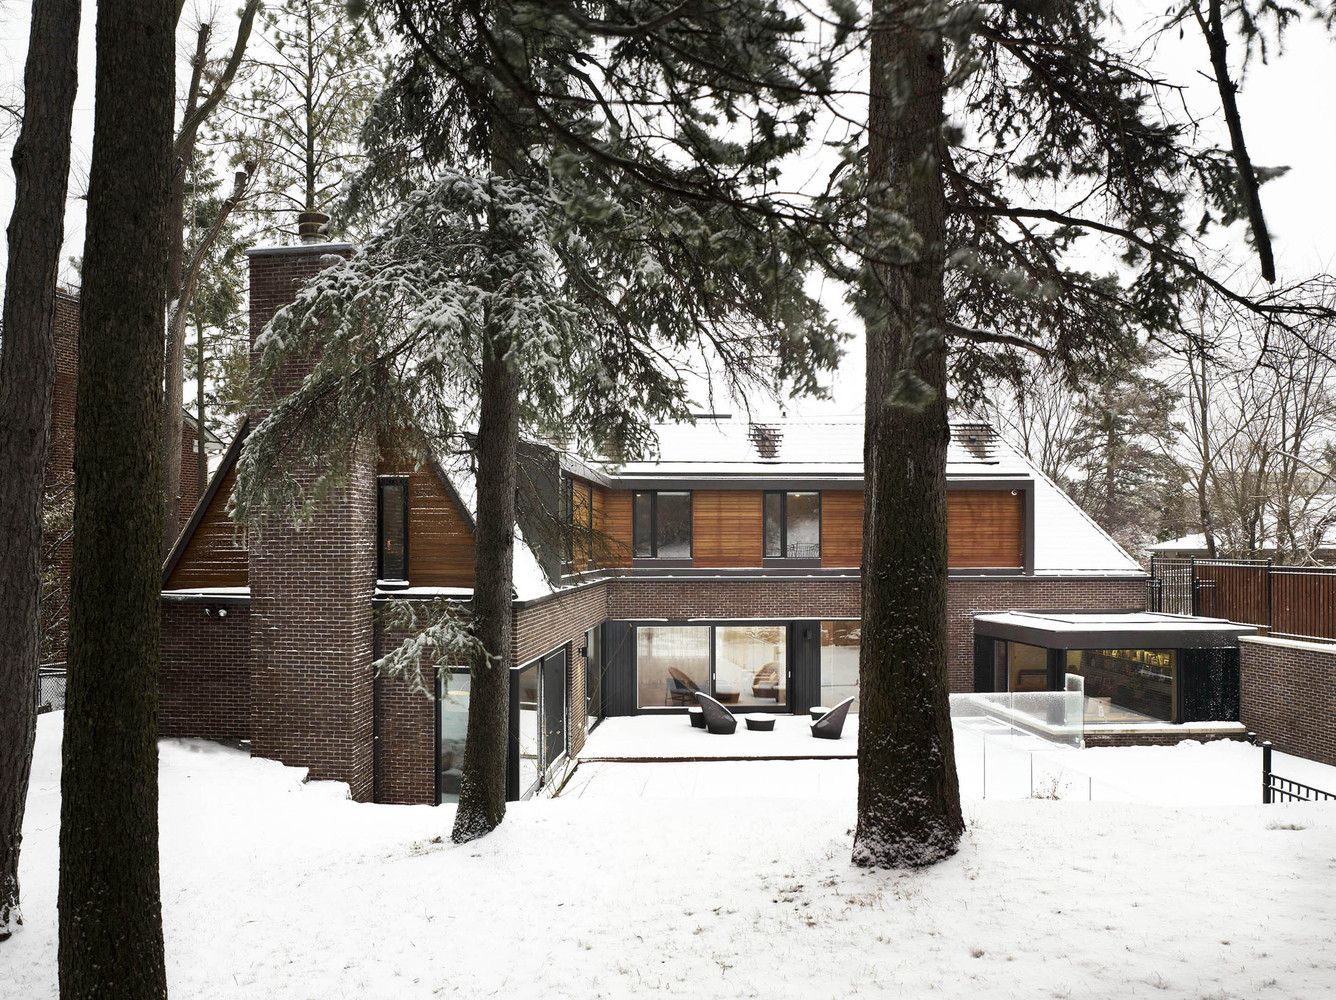 General 1336x1000 forest house architecture snow mansions